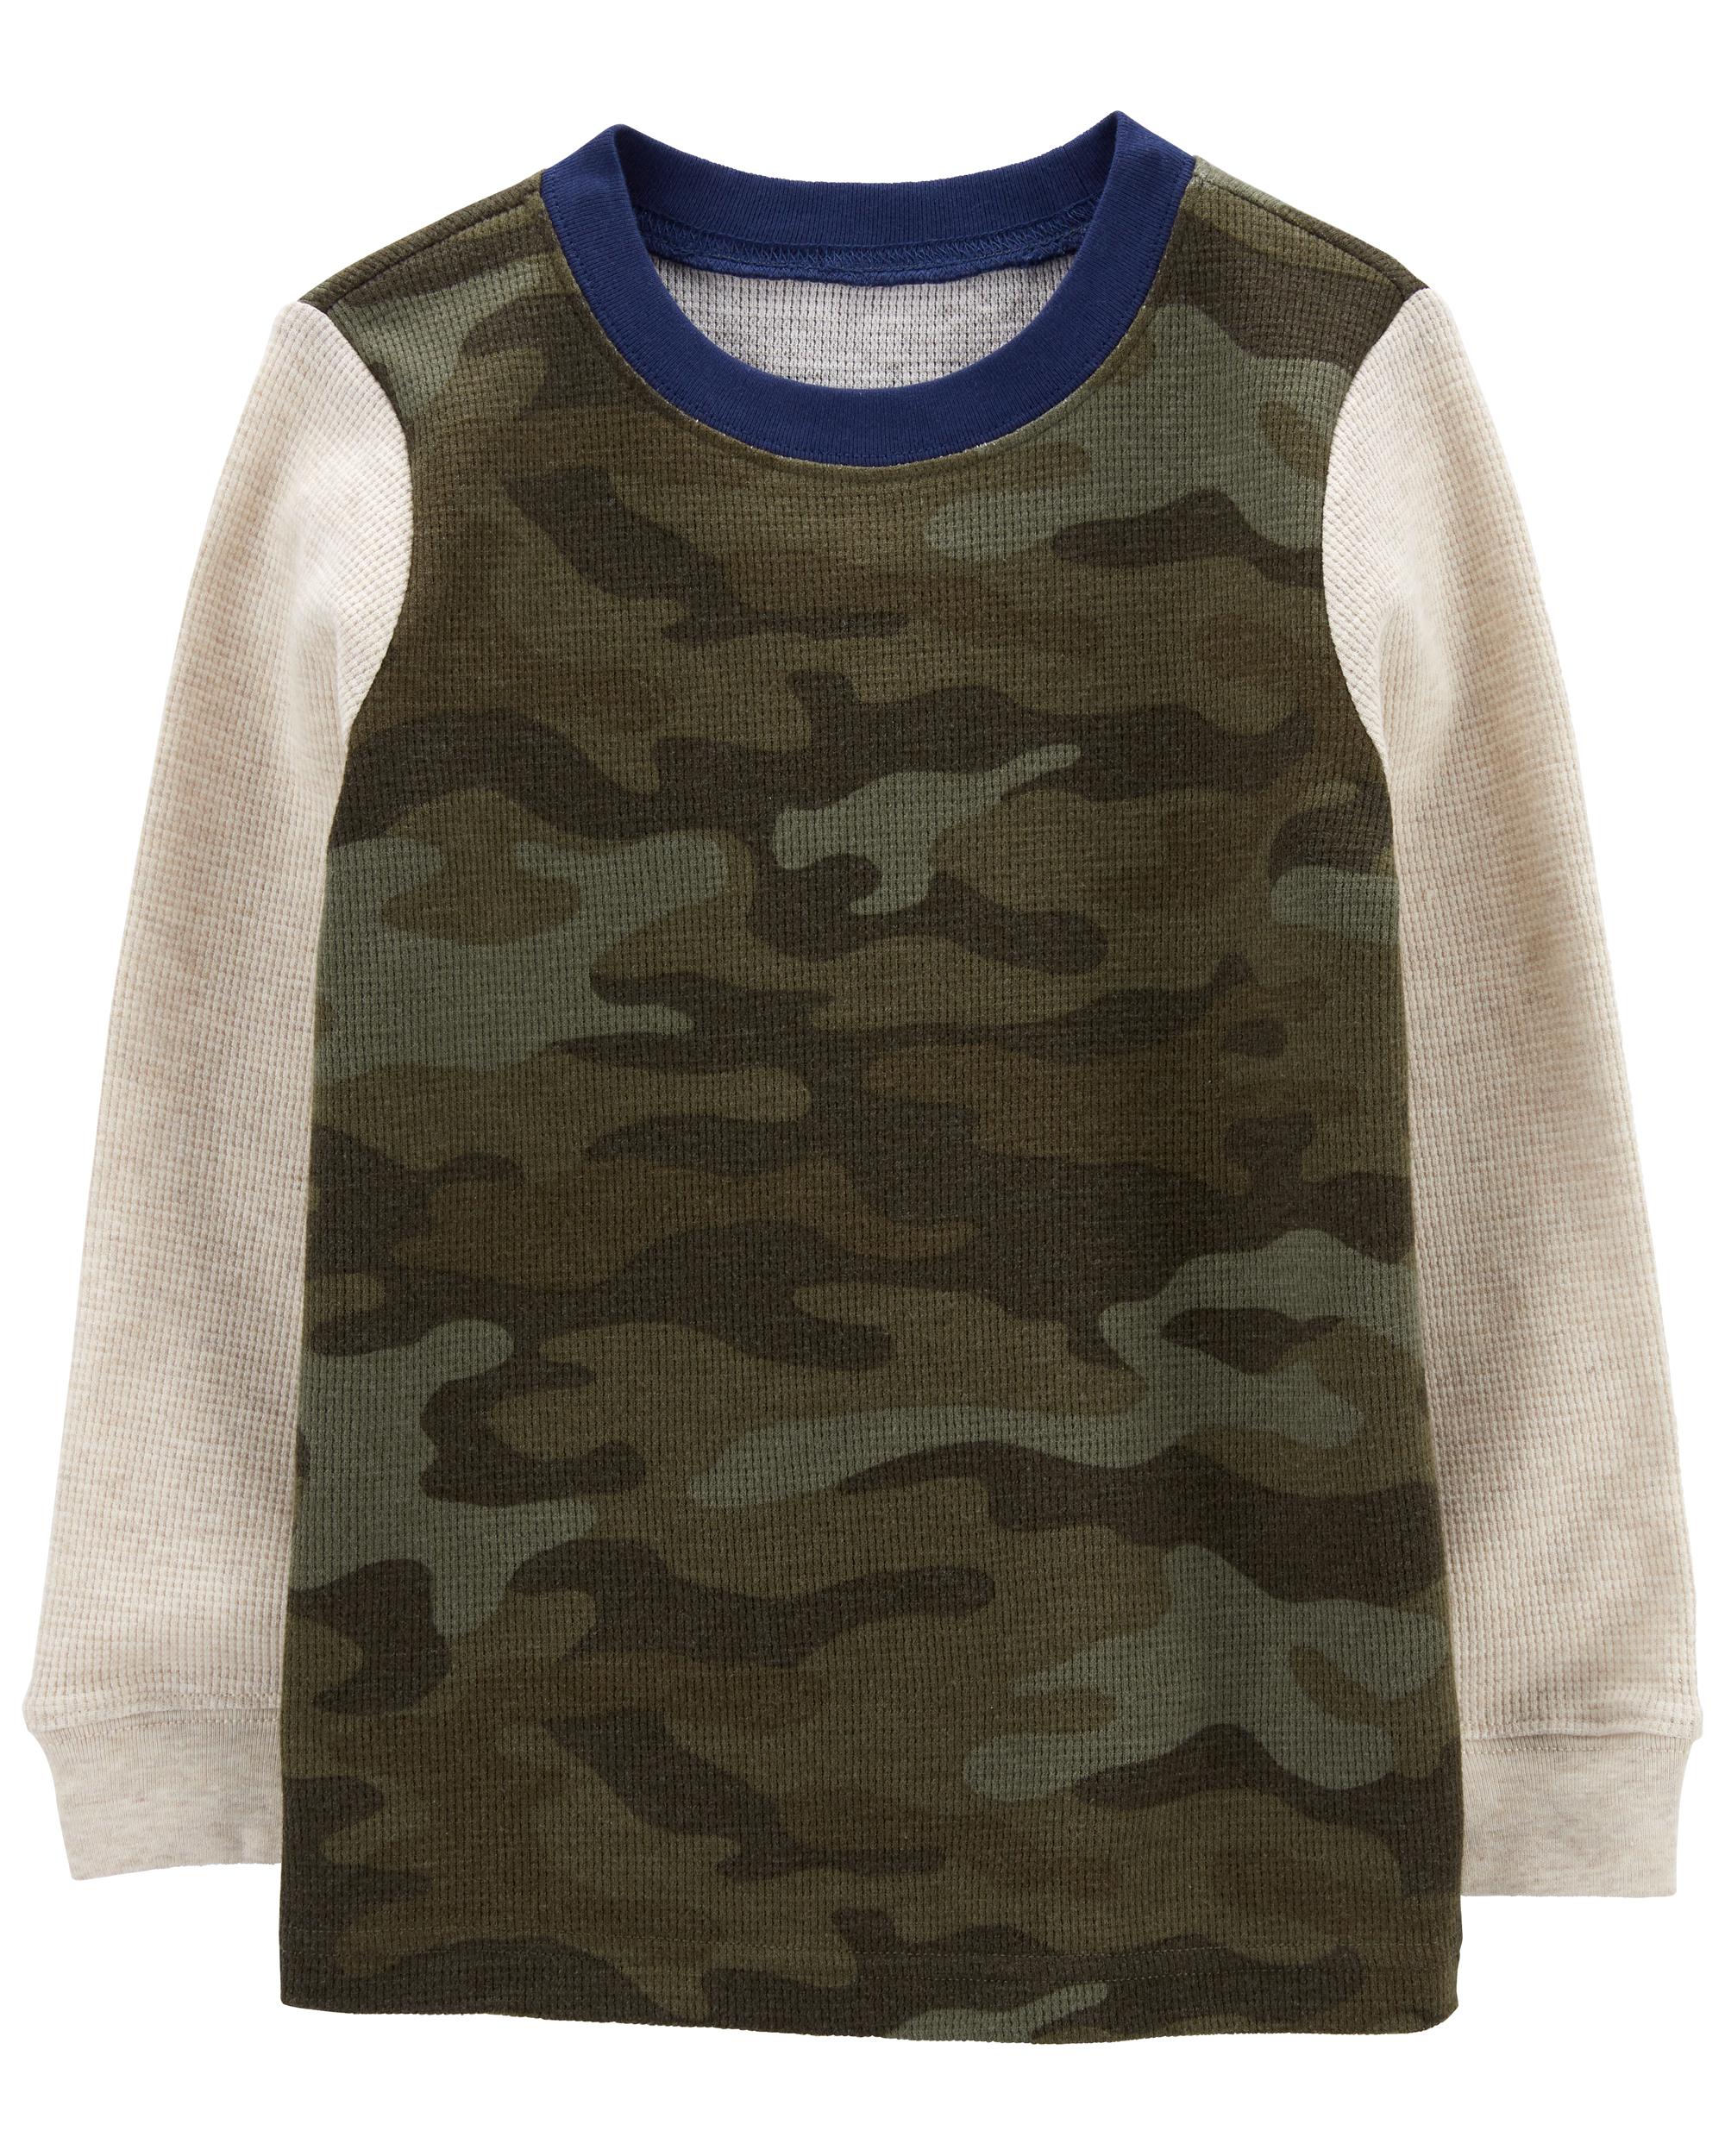 Boys Long Sleeve Camo Thermal Top  The Children's Place CA - GRAY